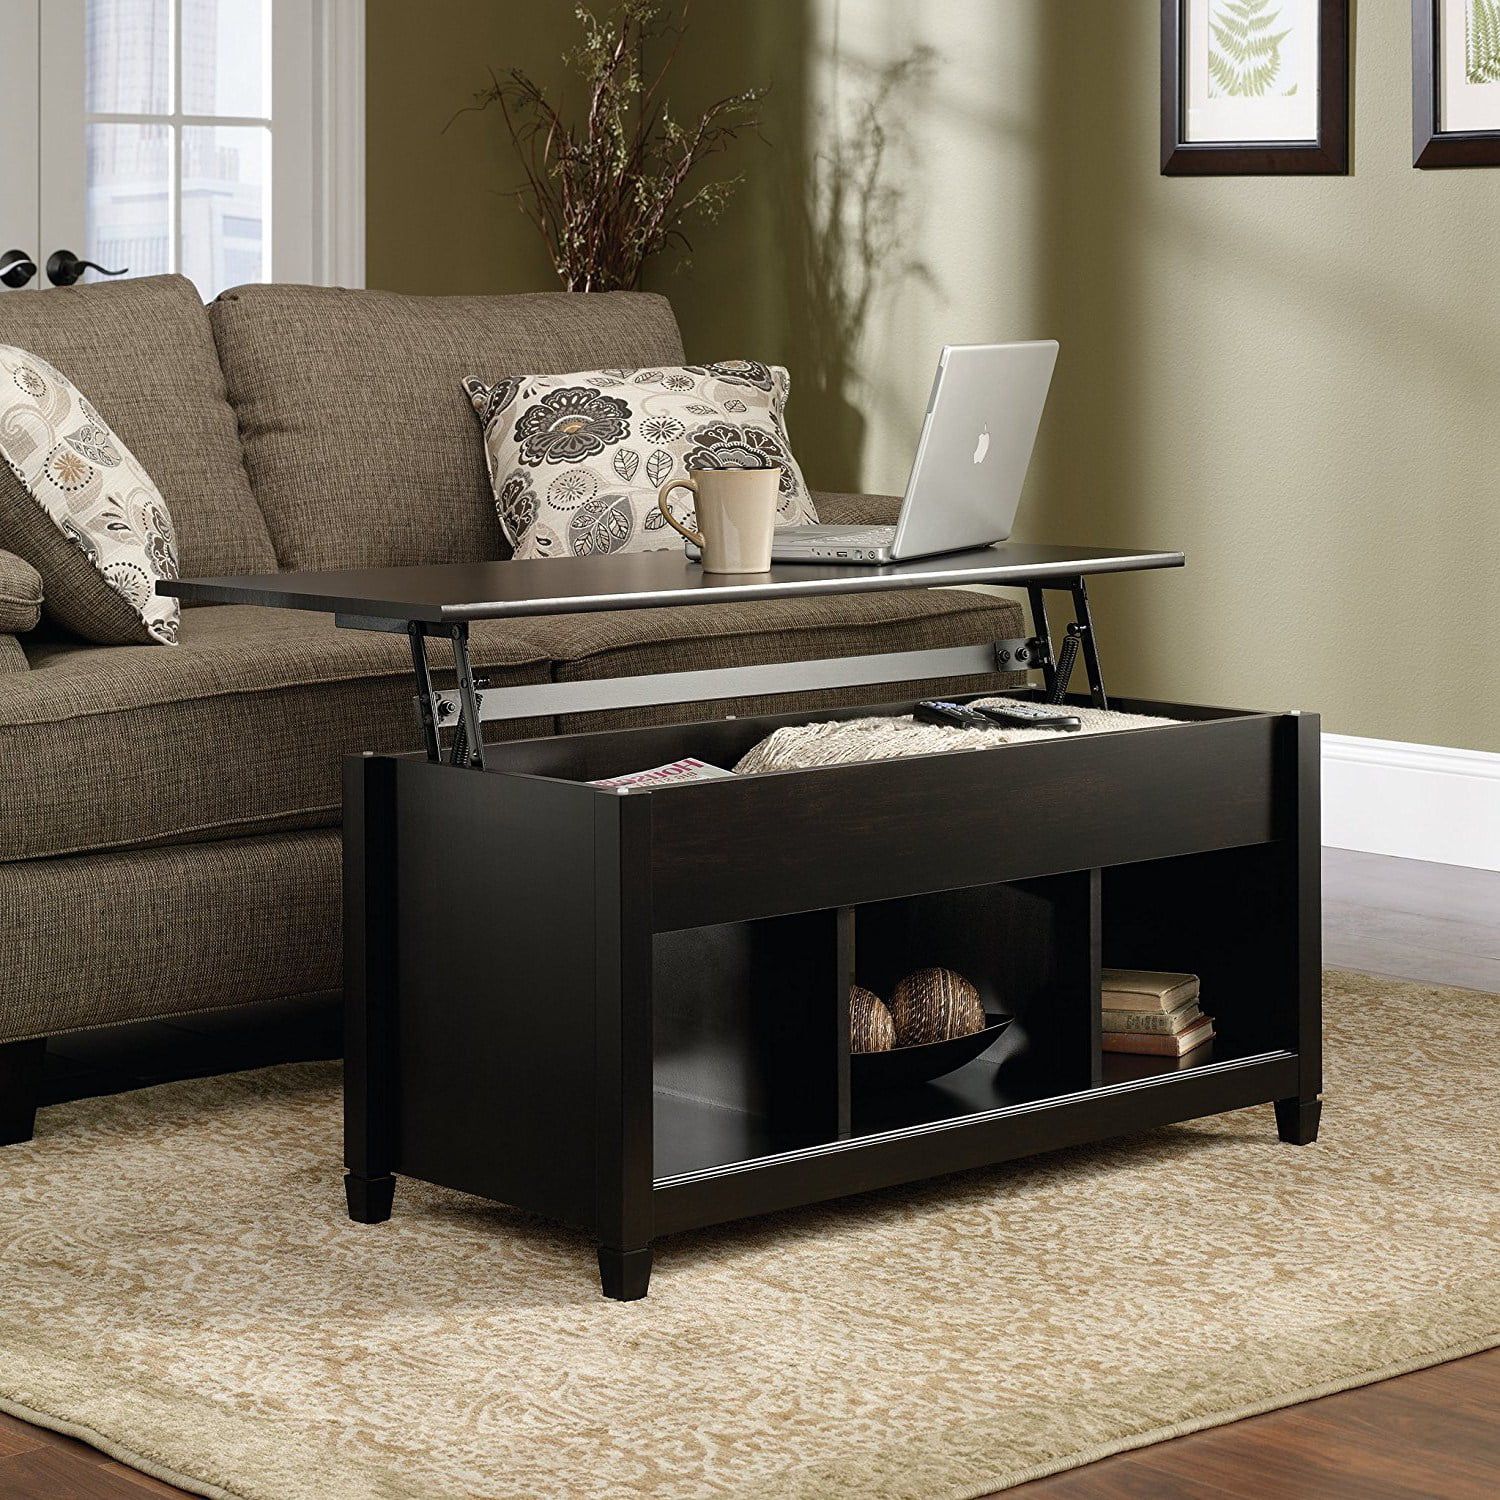 Zimtown Lift Up Top Coffee Table With Hidden Compartment End Rectangle In Lift Top Coffee Tables With Hidden Storage Compartments (View 3 of 20)